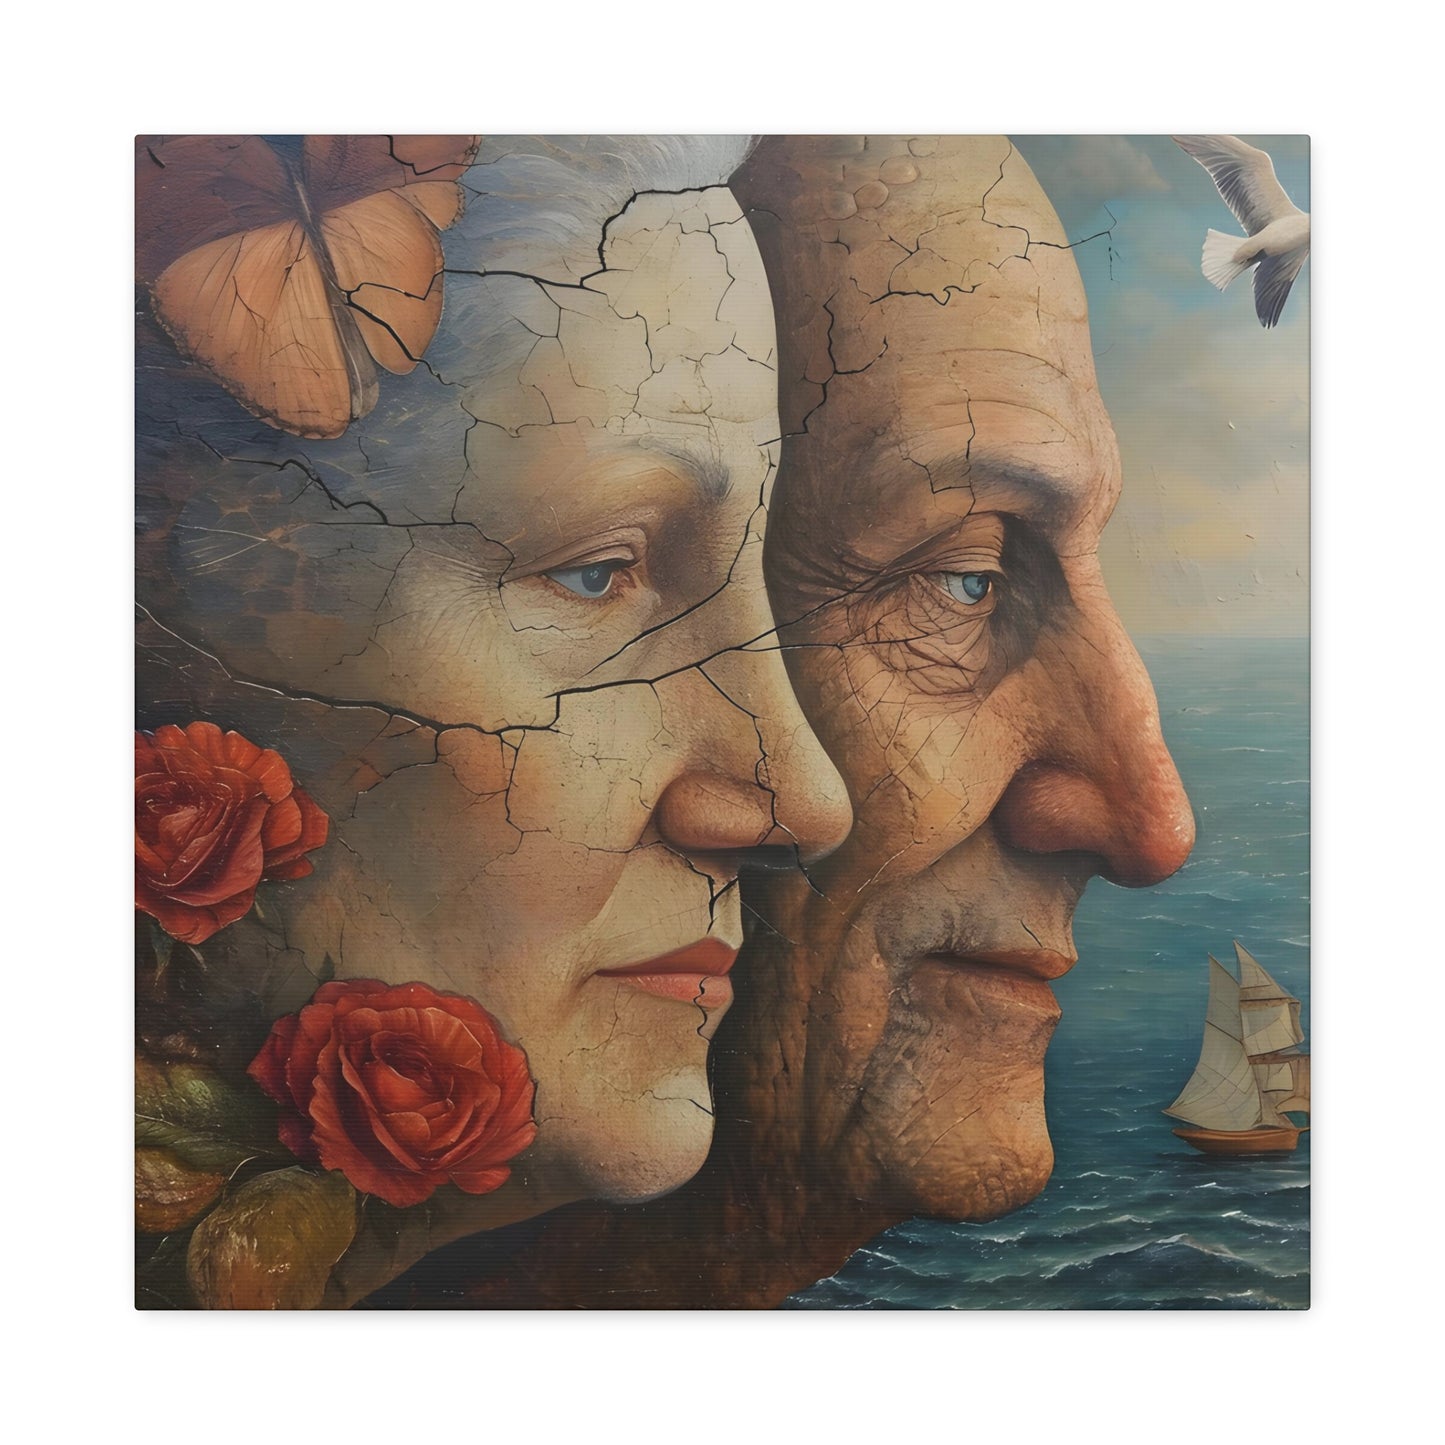 image 3 Evocative painting by Alteo Marin depicting two faces, symbolizing different life stages or a shared lifetime. Features include a cracked texture representing life's experiences, a butterfly on a woman’s temple symbolizing transformation, roses for romance, a tranquil sea background with a sailing ship for life's journey, and a seagull representing freedom. Printed on 100% cotton fabric for vibrant detail.